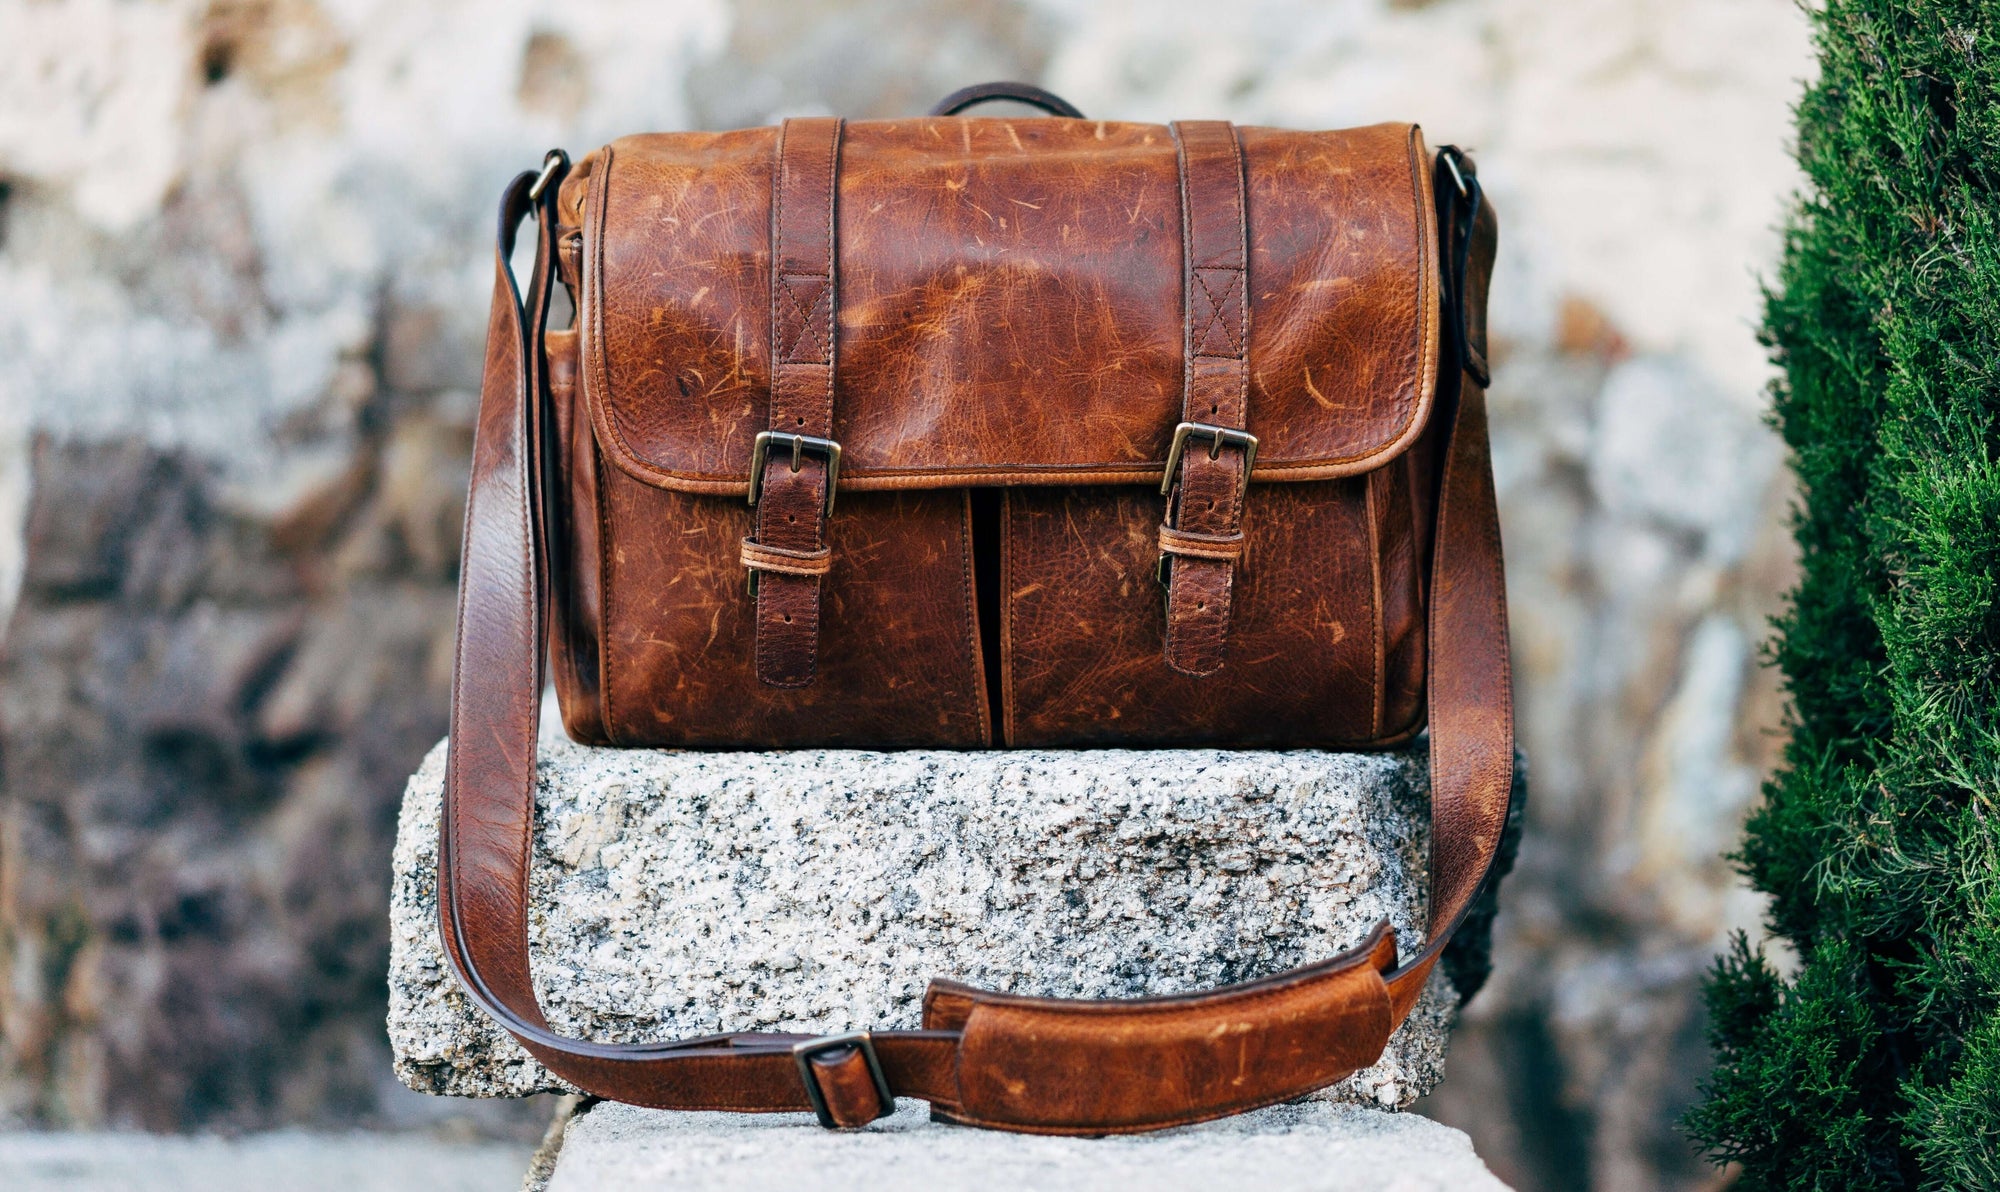 A brown messenger bag sitting on a grey stone, in front of a grey stone wall.